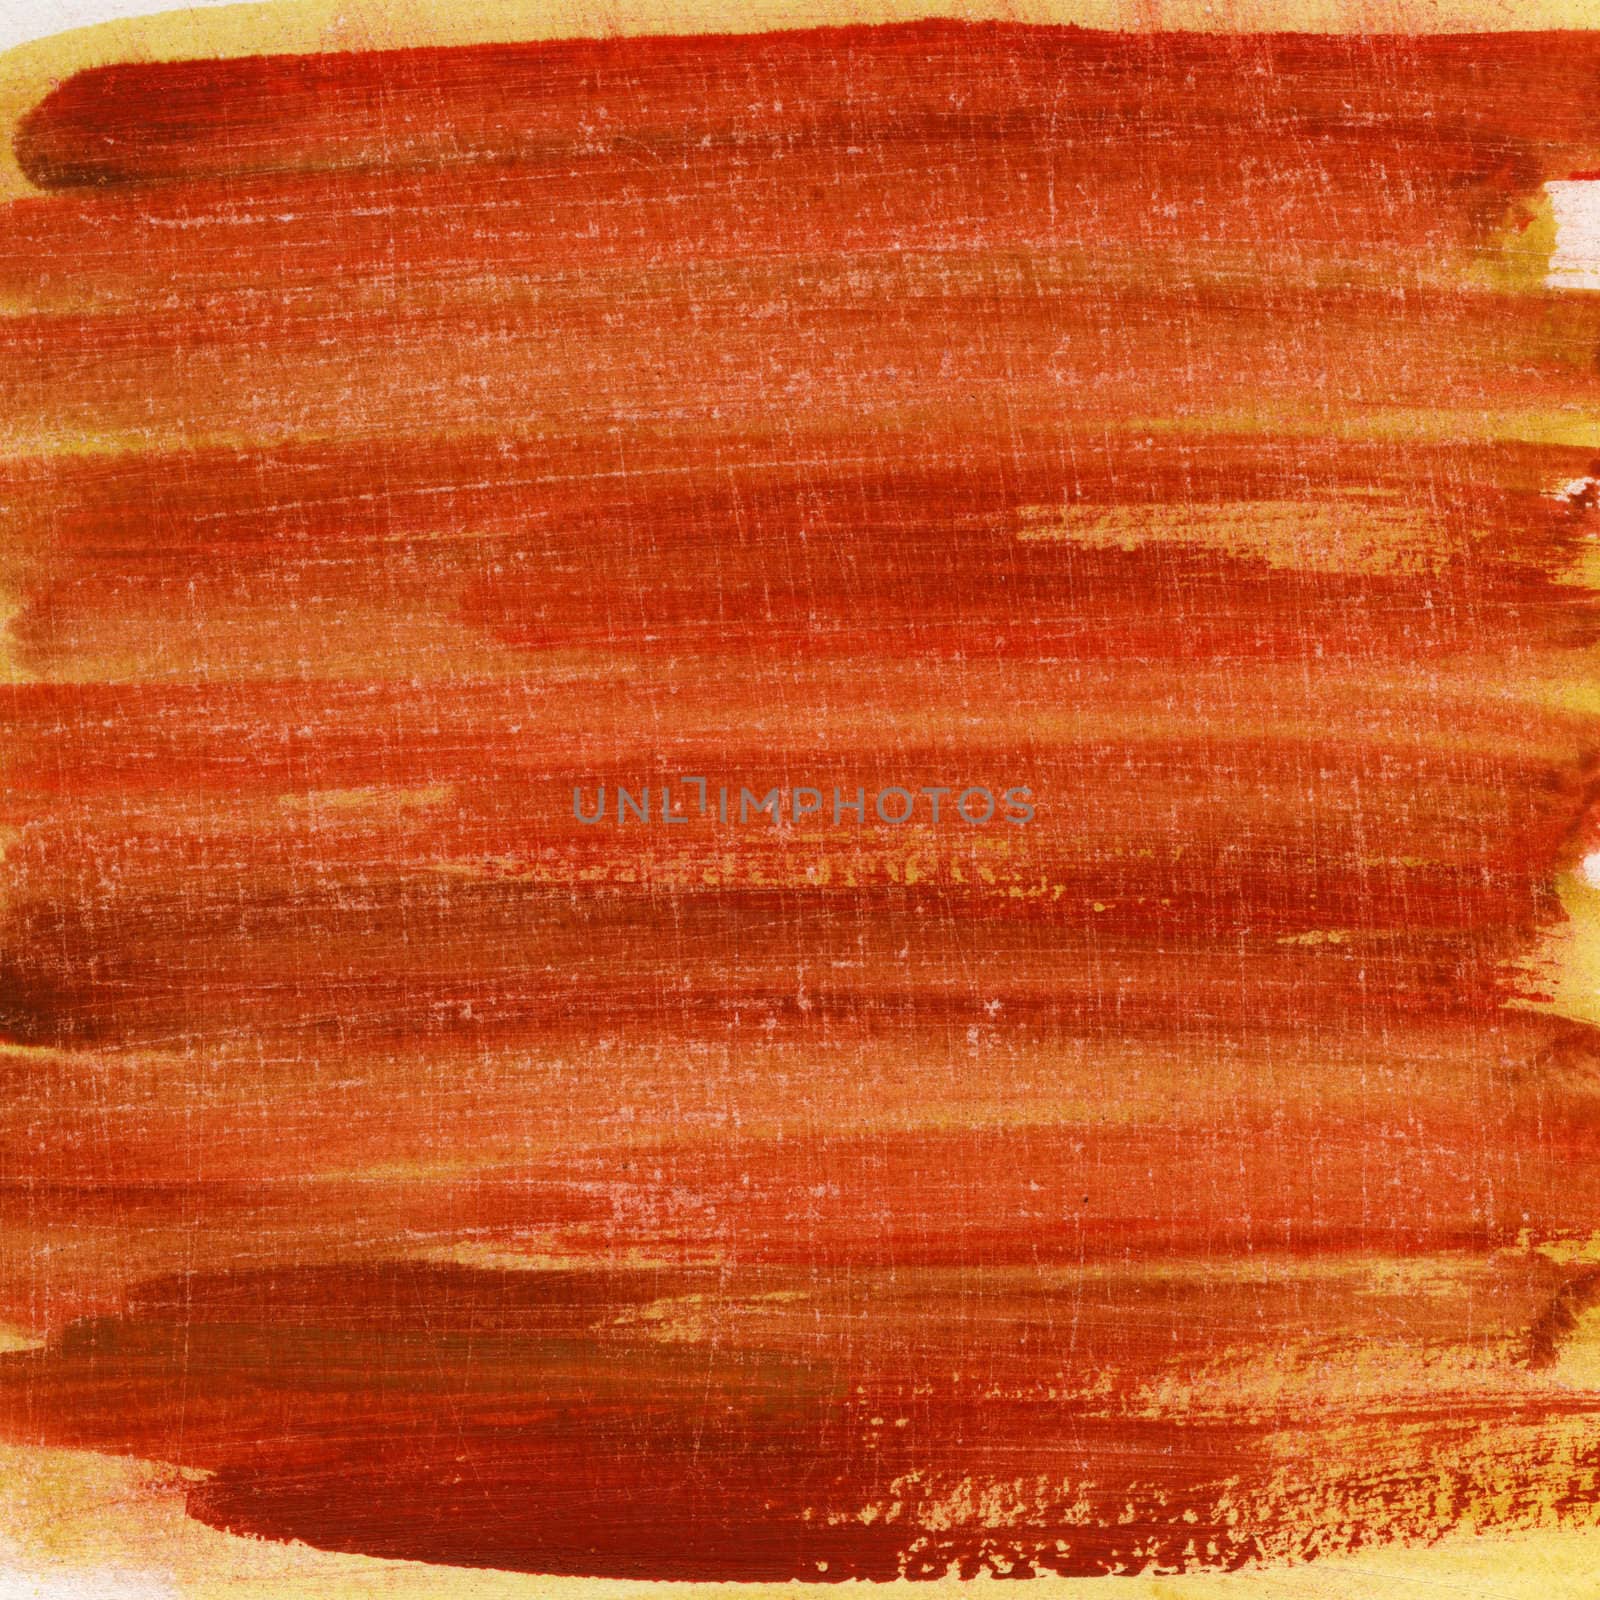 red orange yellow watercolor abstract hand painted with horizontal brush strokes on paper, scratch texture,  self made